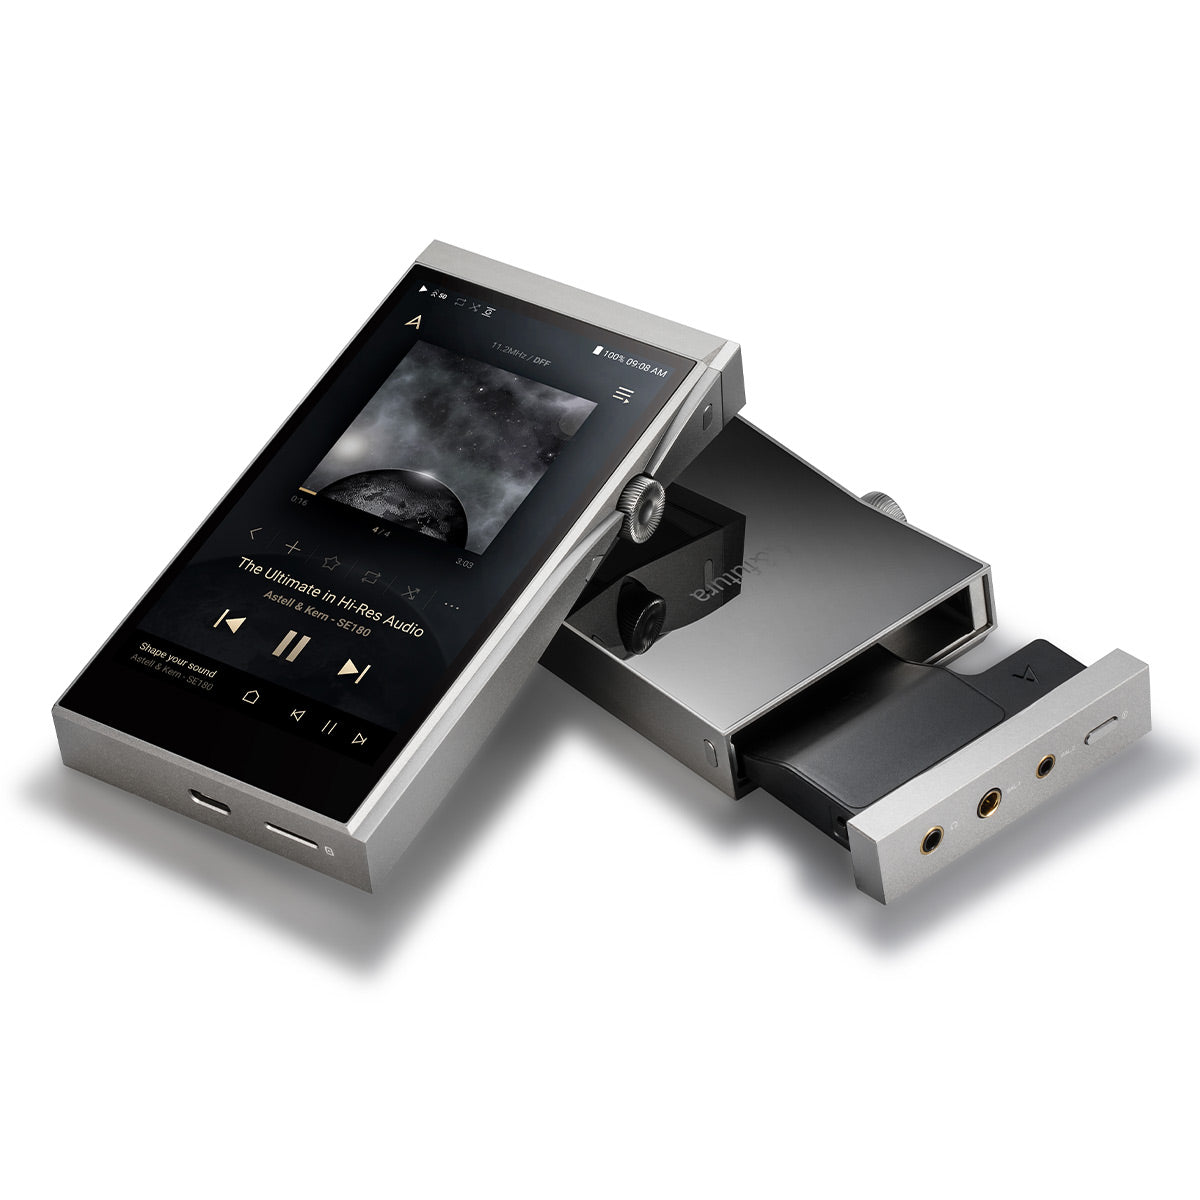 Astell & Kern SE180 All-in-One DAC/AMP Module (Moon Silver) with SEM2 Interchangeable All-in-One Module